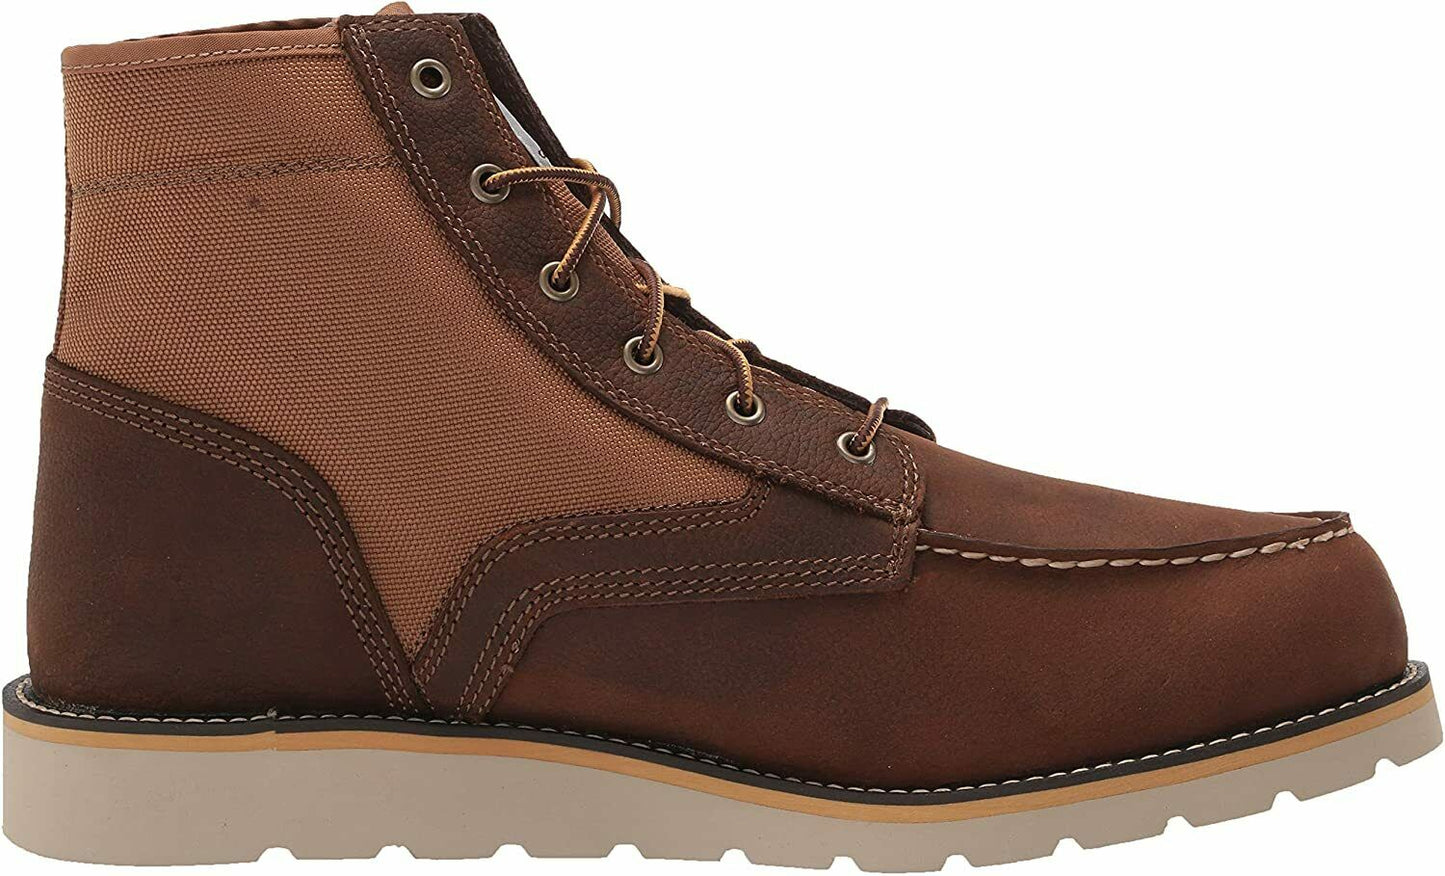 Carhartt Men's Soft Toe Breathable Fabric Electrical Hazard Lace-Up Boot FW6035